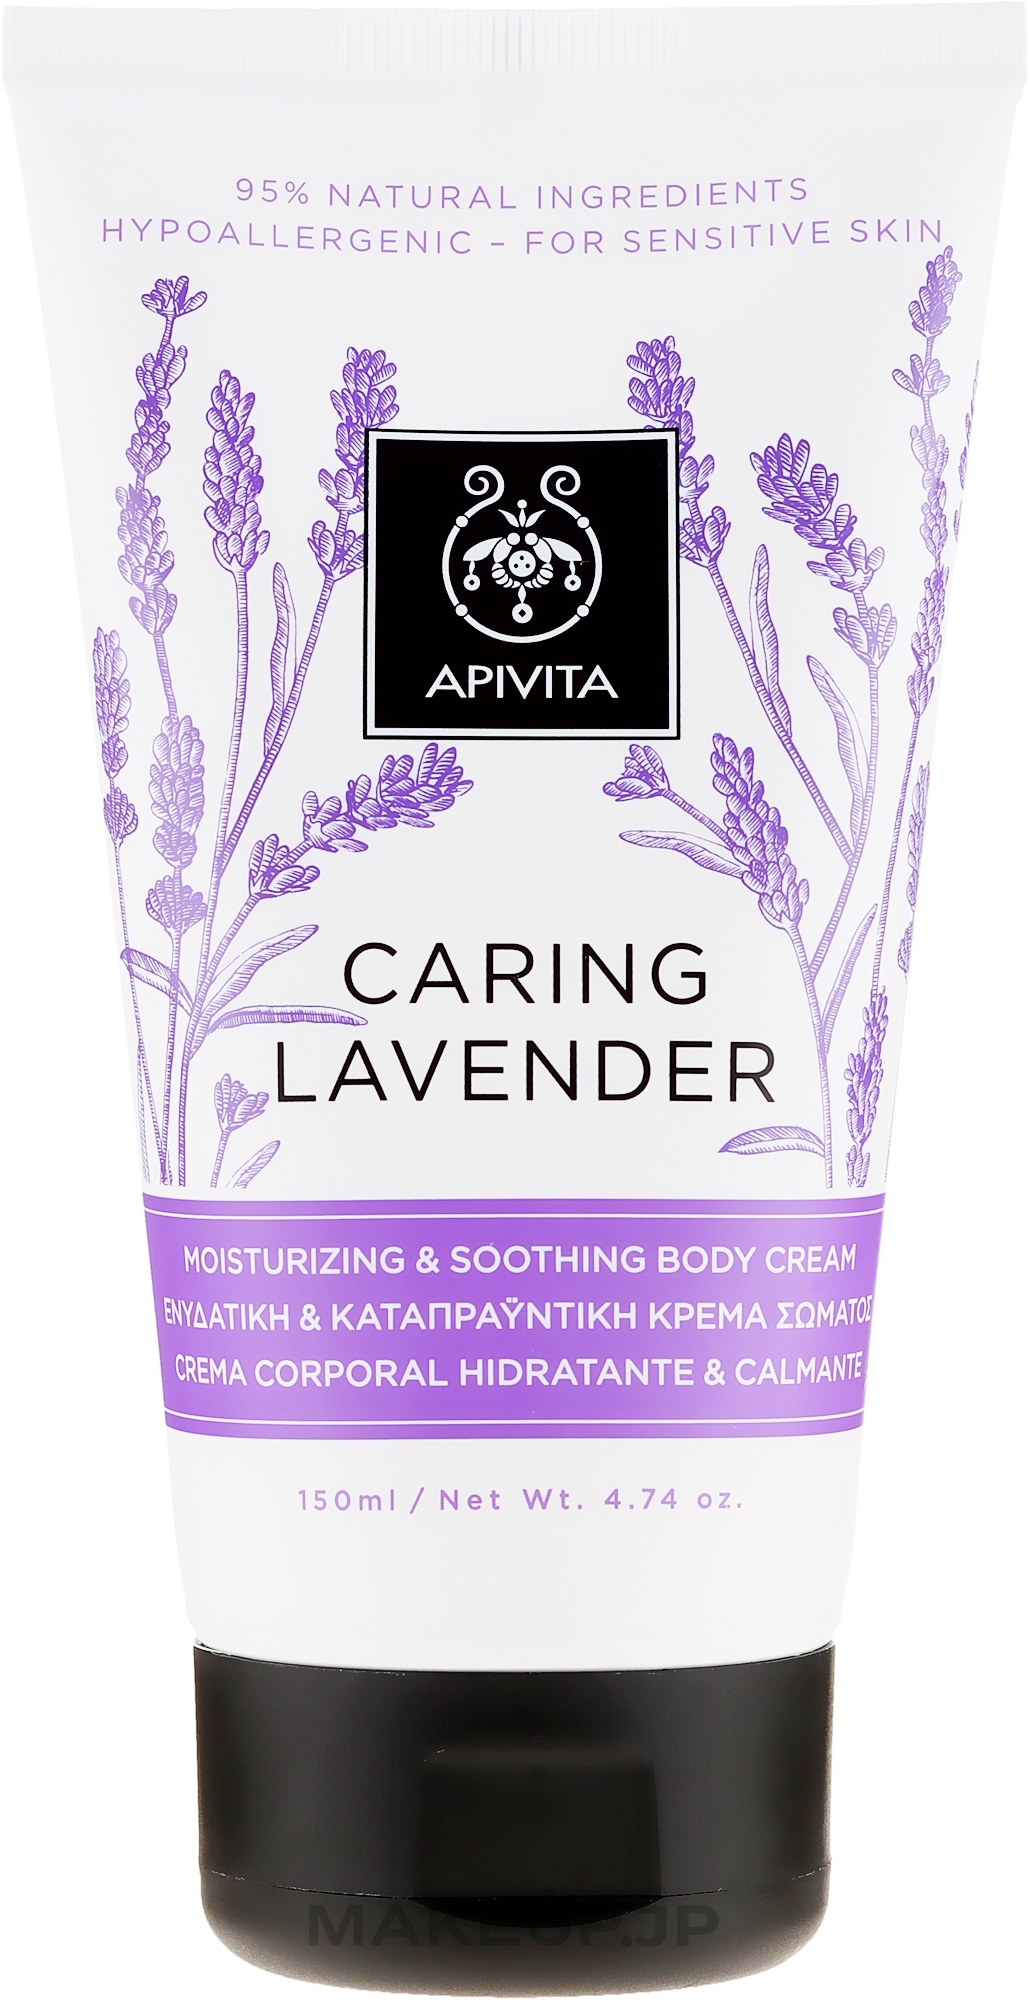 Moisturizing & Soothing Lavender Body Cream for Sensitive Skin - Apivita Caring Lavender Hydrating Soothing Body Lotion — photo 150 ml